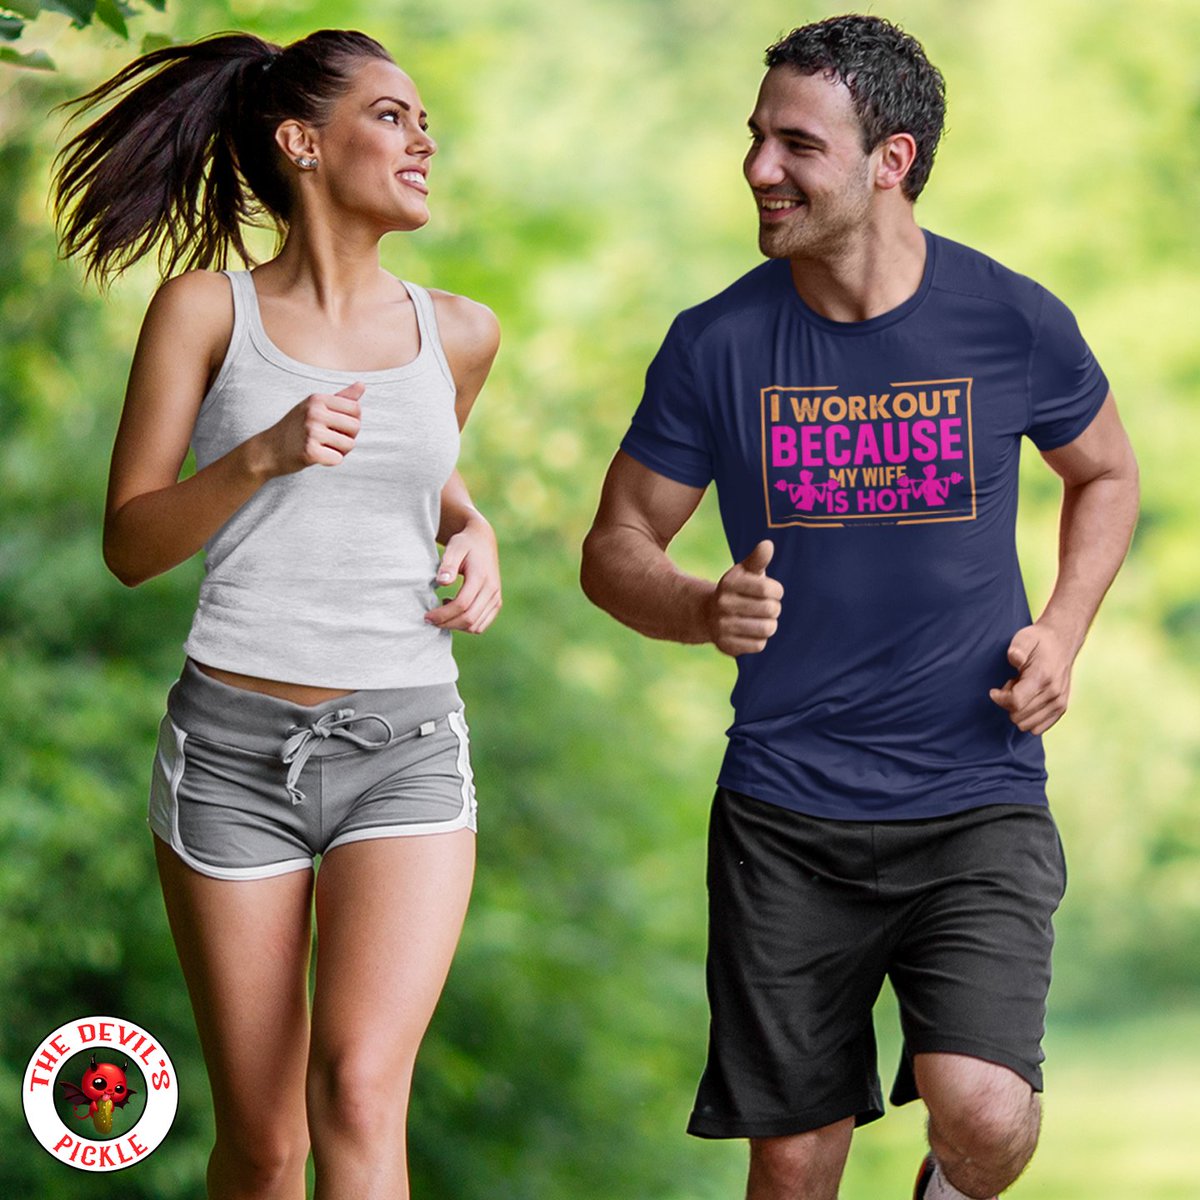 I workout because my wife is hot... and I need to keep up! Workout, Adult Humor, Patriotic and More only at The Devil's Pickle.

 #adultinghumor #freeshipping #Thedevilspickle #USA #workouttees #workoutmeme #exerciseshirts #happyshirts #americanpride #workoutgear #exercisegear